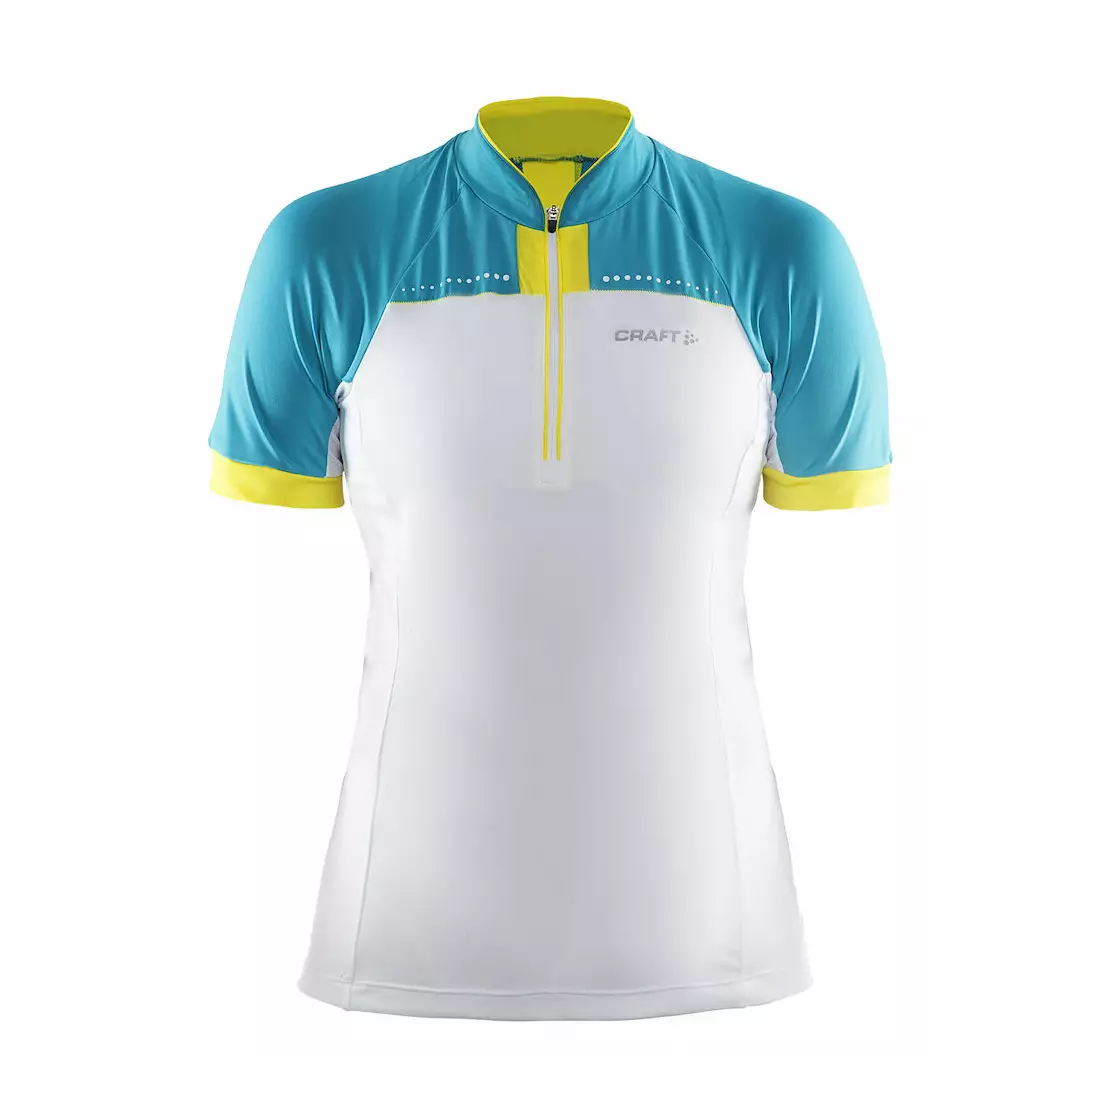 CRAFT MOVE women's cycling jersey 1903270-2305